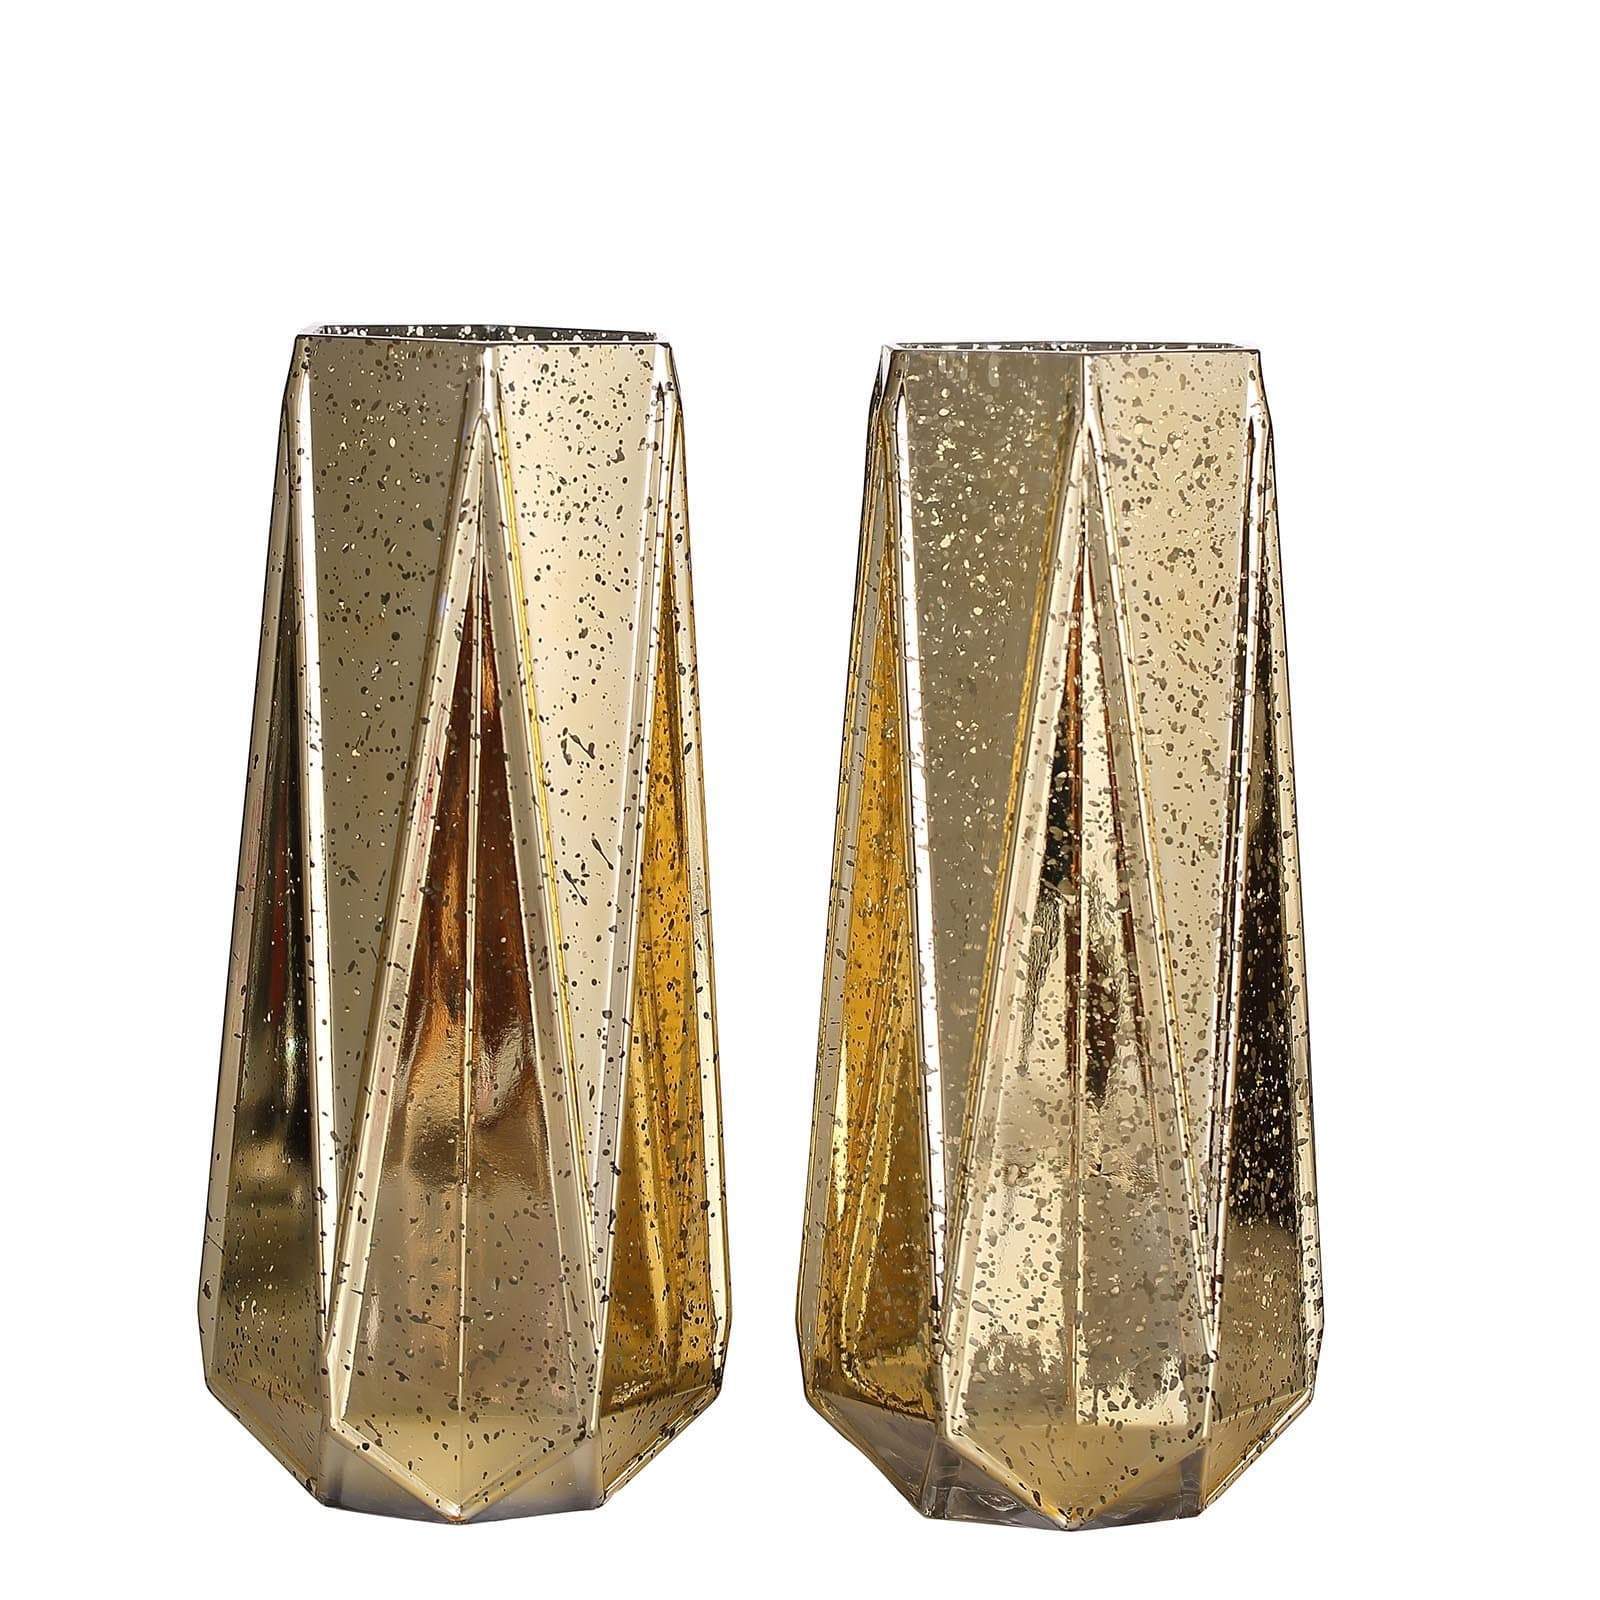 2 pcs 8 in tall Gold Geometric Mercury Glass Vases Centerpieces